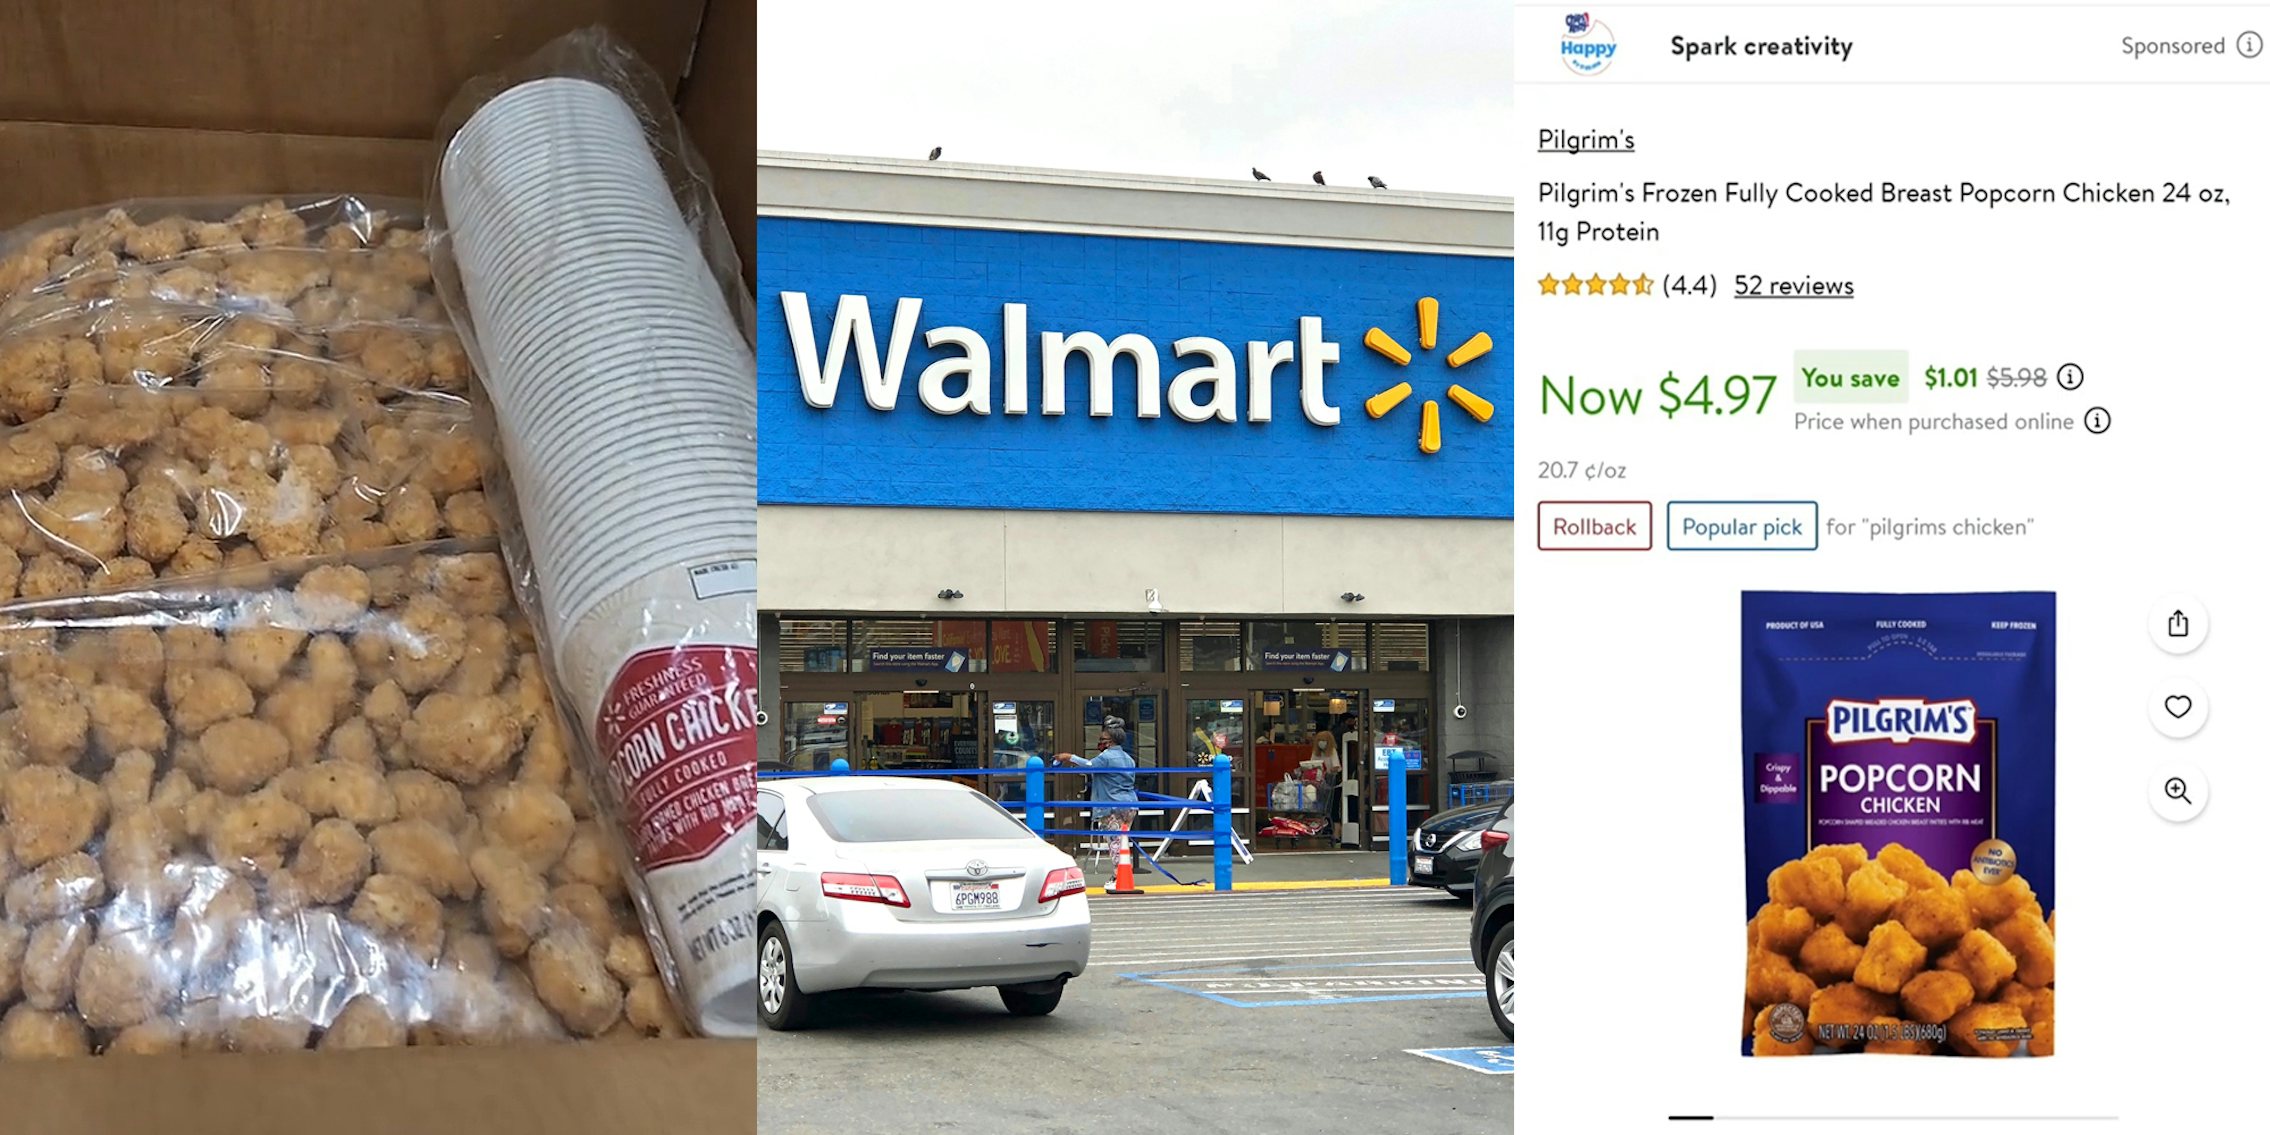 frozen popcorn chicken in cardboard box with serving cups (l) Walmart entrance with sign (c) Pilgrim's Frozen Fully Cooked Breast Popcorn Chicken item listing for $4.97 (r)